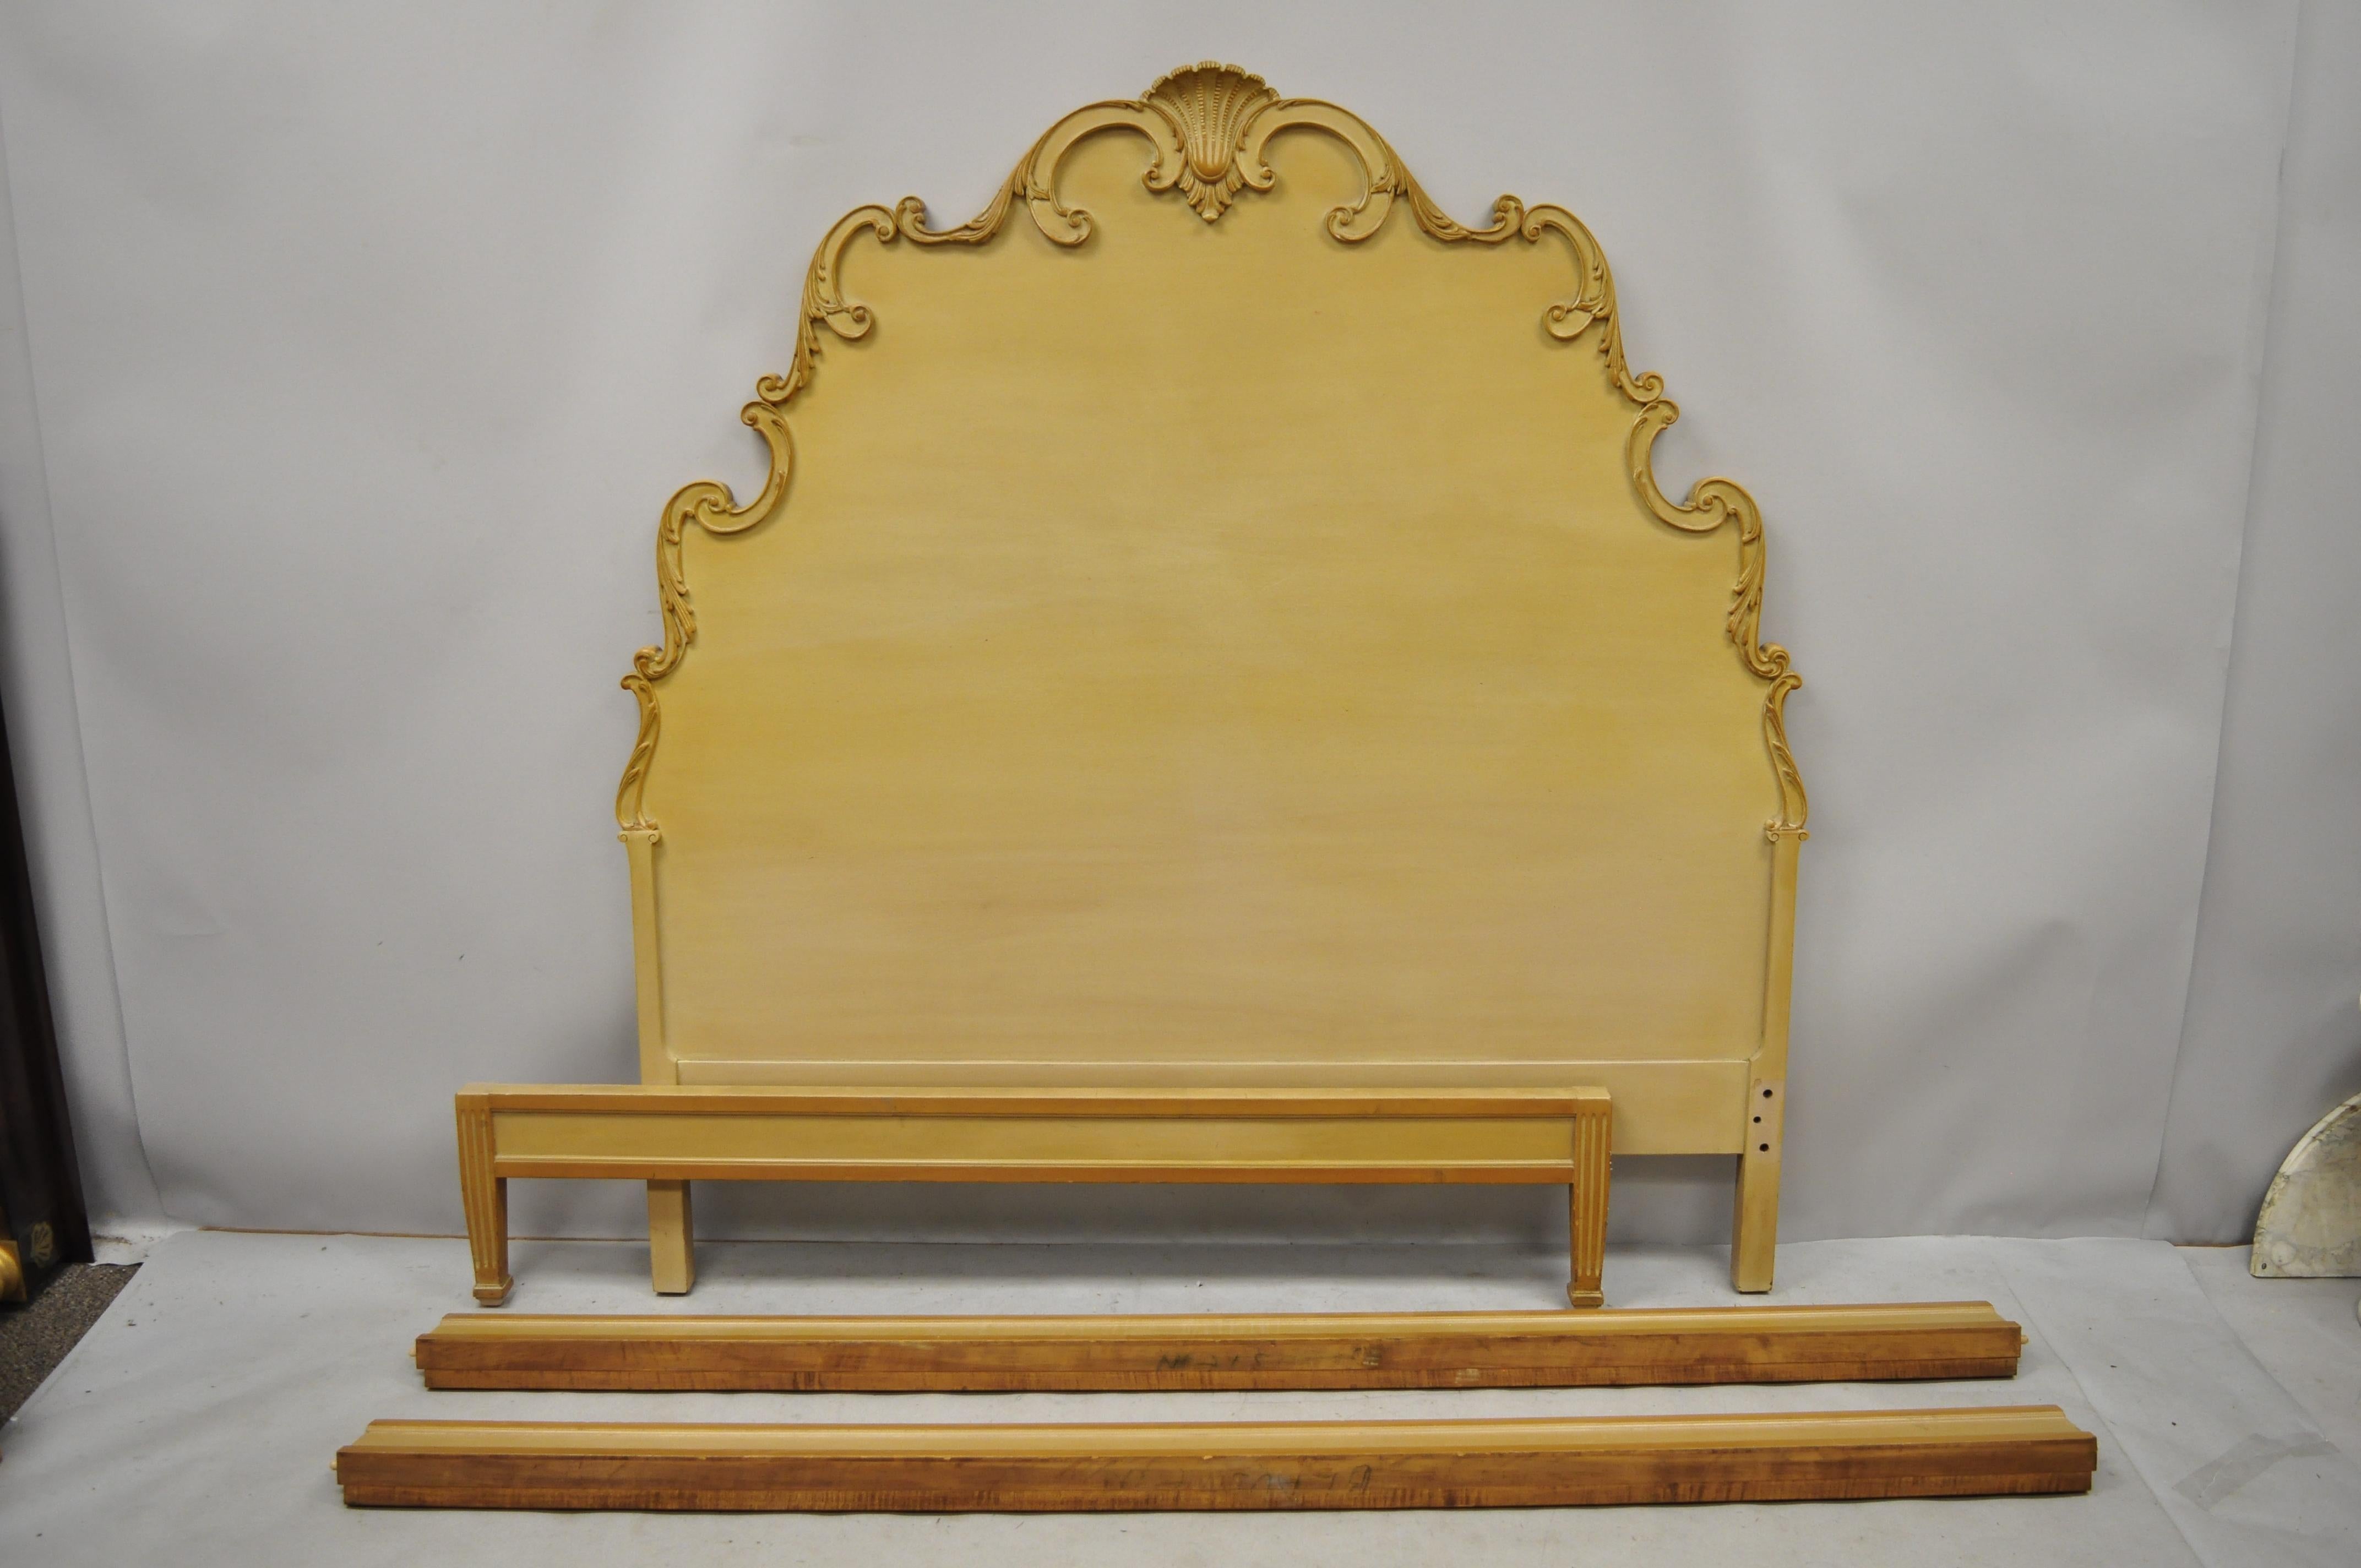 Vintage Italian Rococo shell carved ornate wooden full size bed frame. Item features a tall ornate scrollwork shell carved headboard, low profile footboard, bolted rails, lightly whitewashed finish, nicely carved details, great style and form. Fits